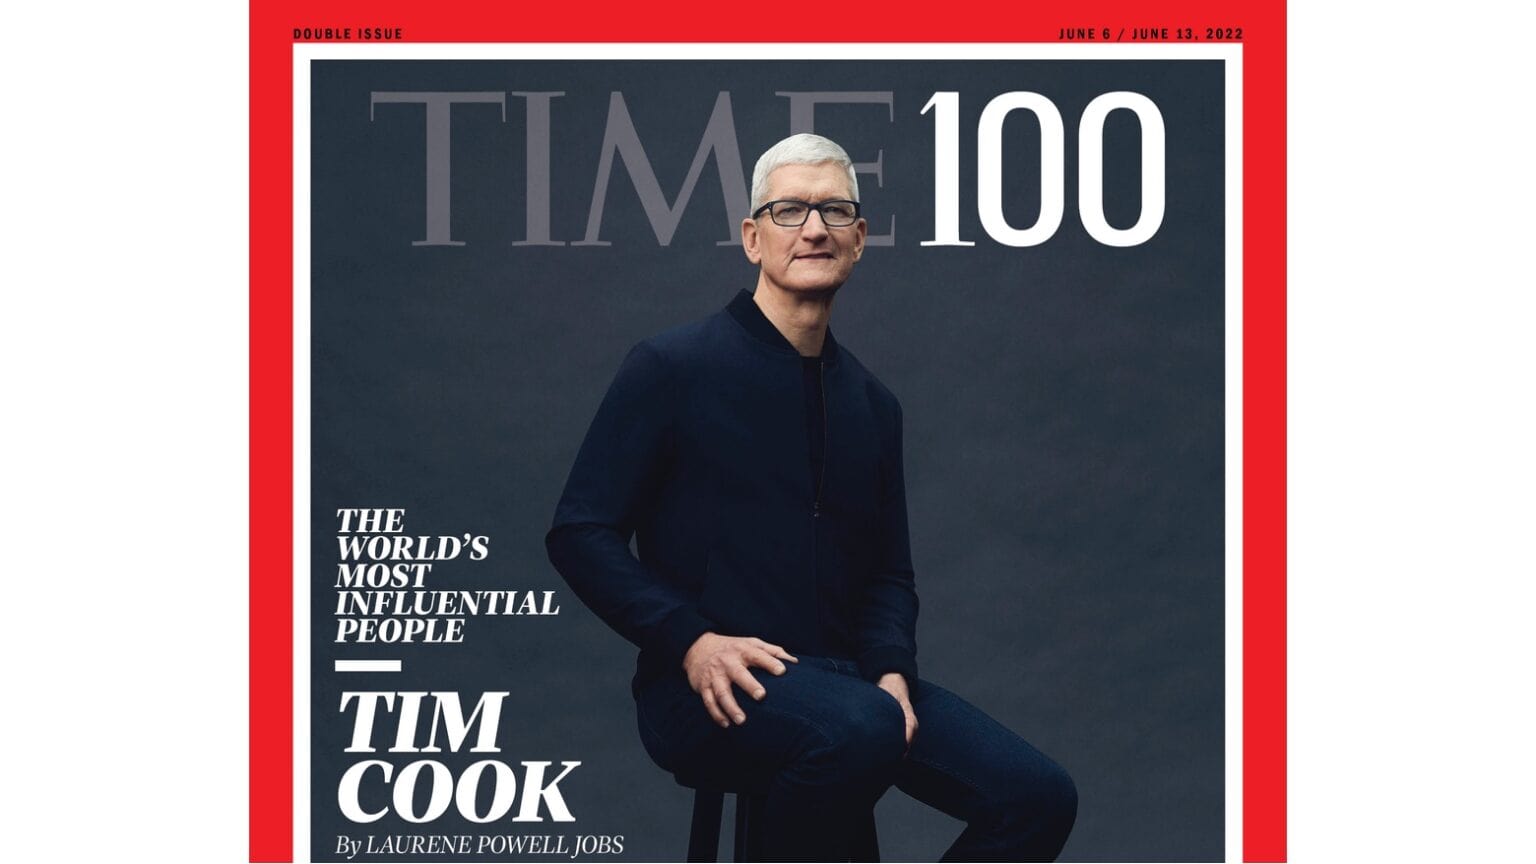 Tim Cook named one of Time’s 100 most influential people